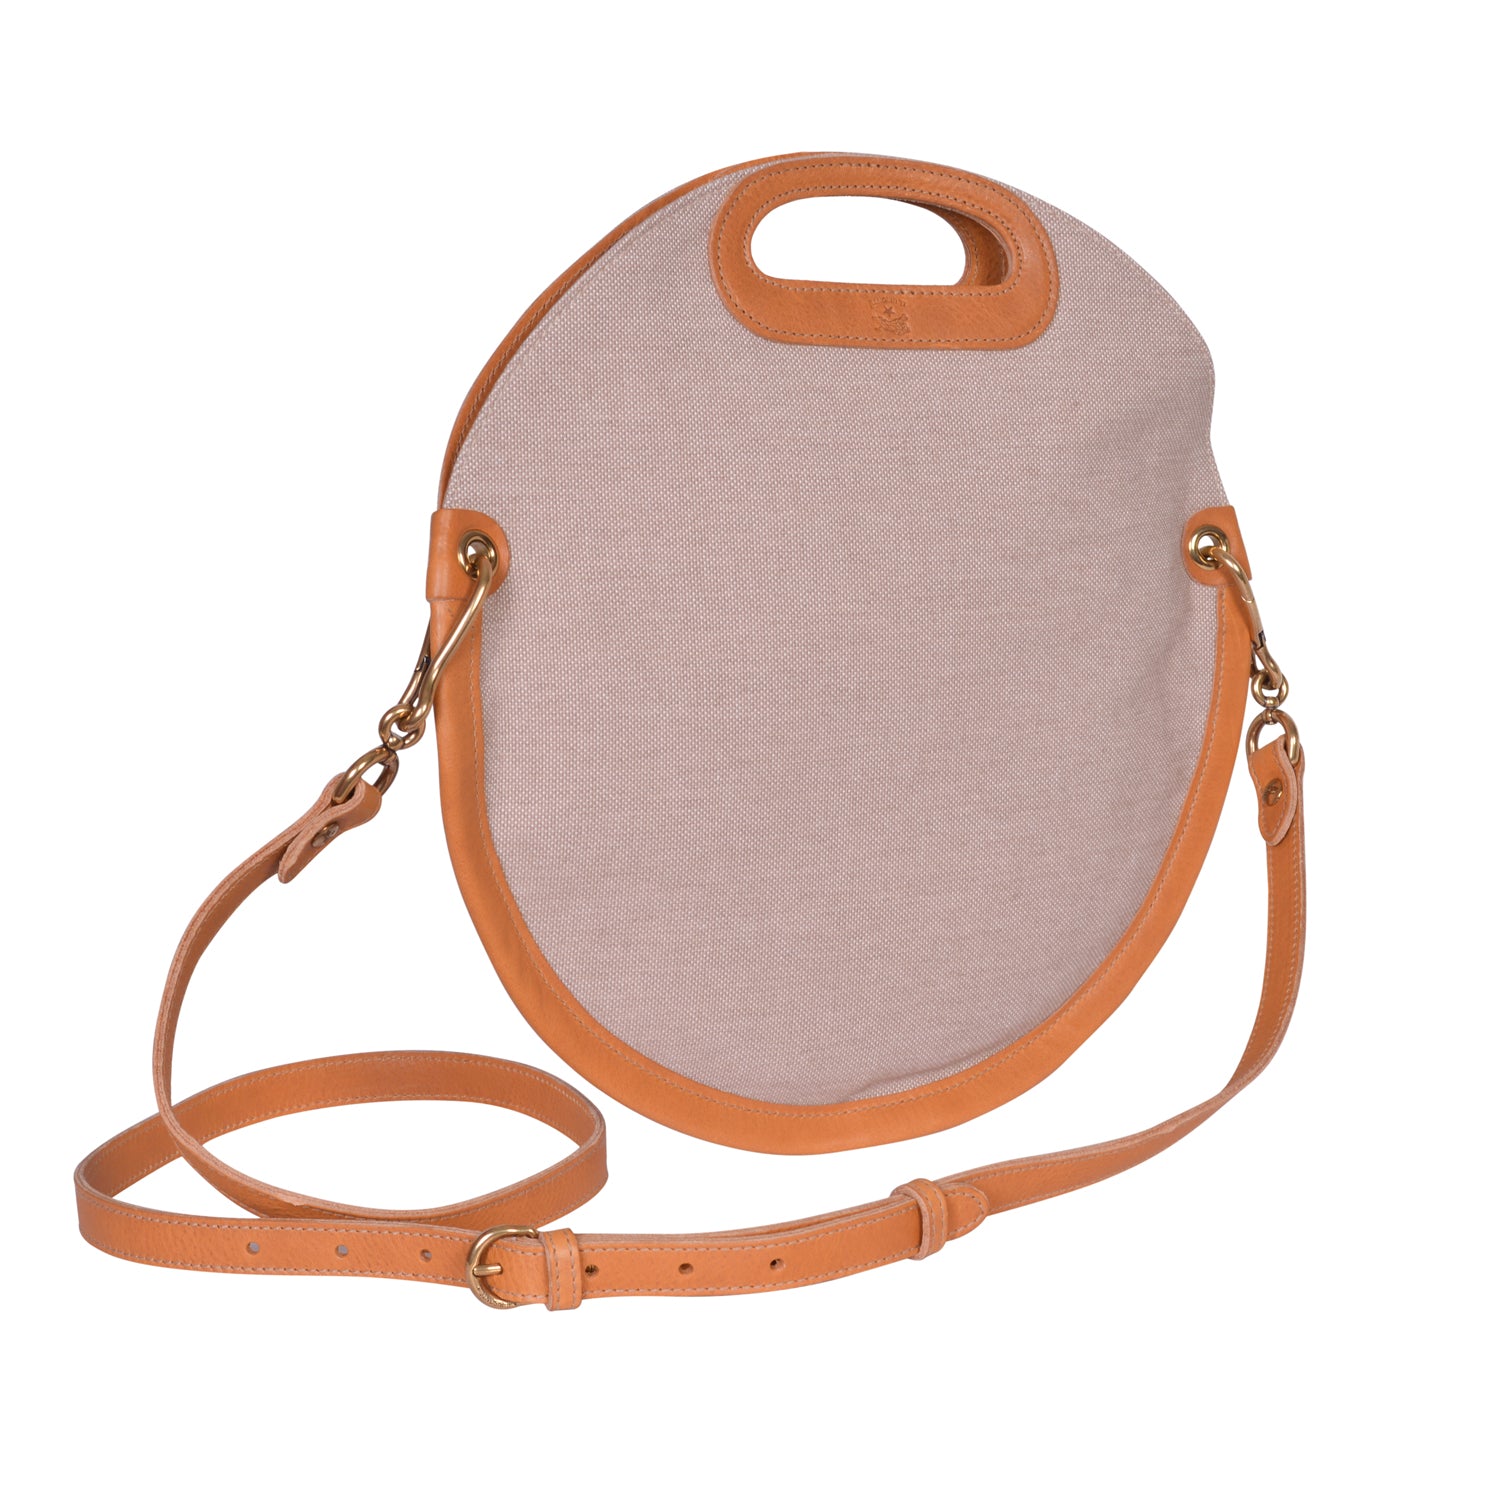 IL BISONTE  CASUAL WOMEN'S CIRCULAR HANDBAG IN NATURAL TECHNICAL FABRIC